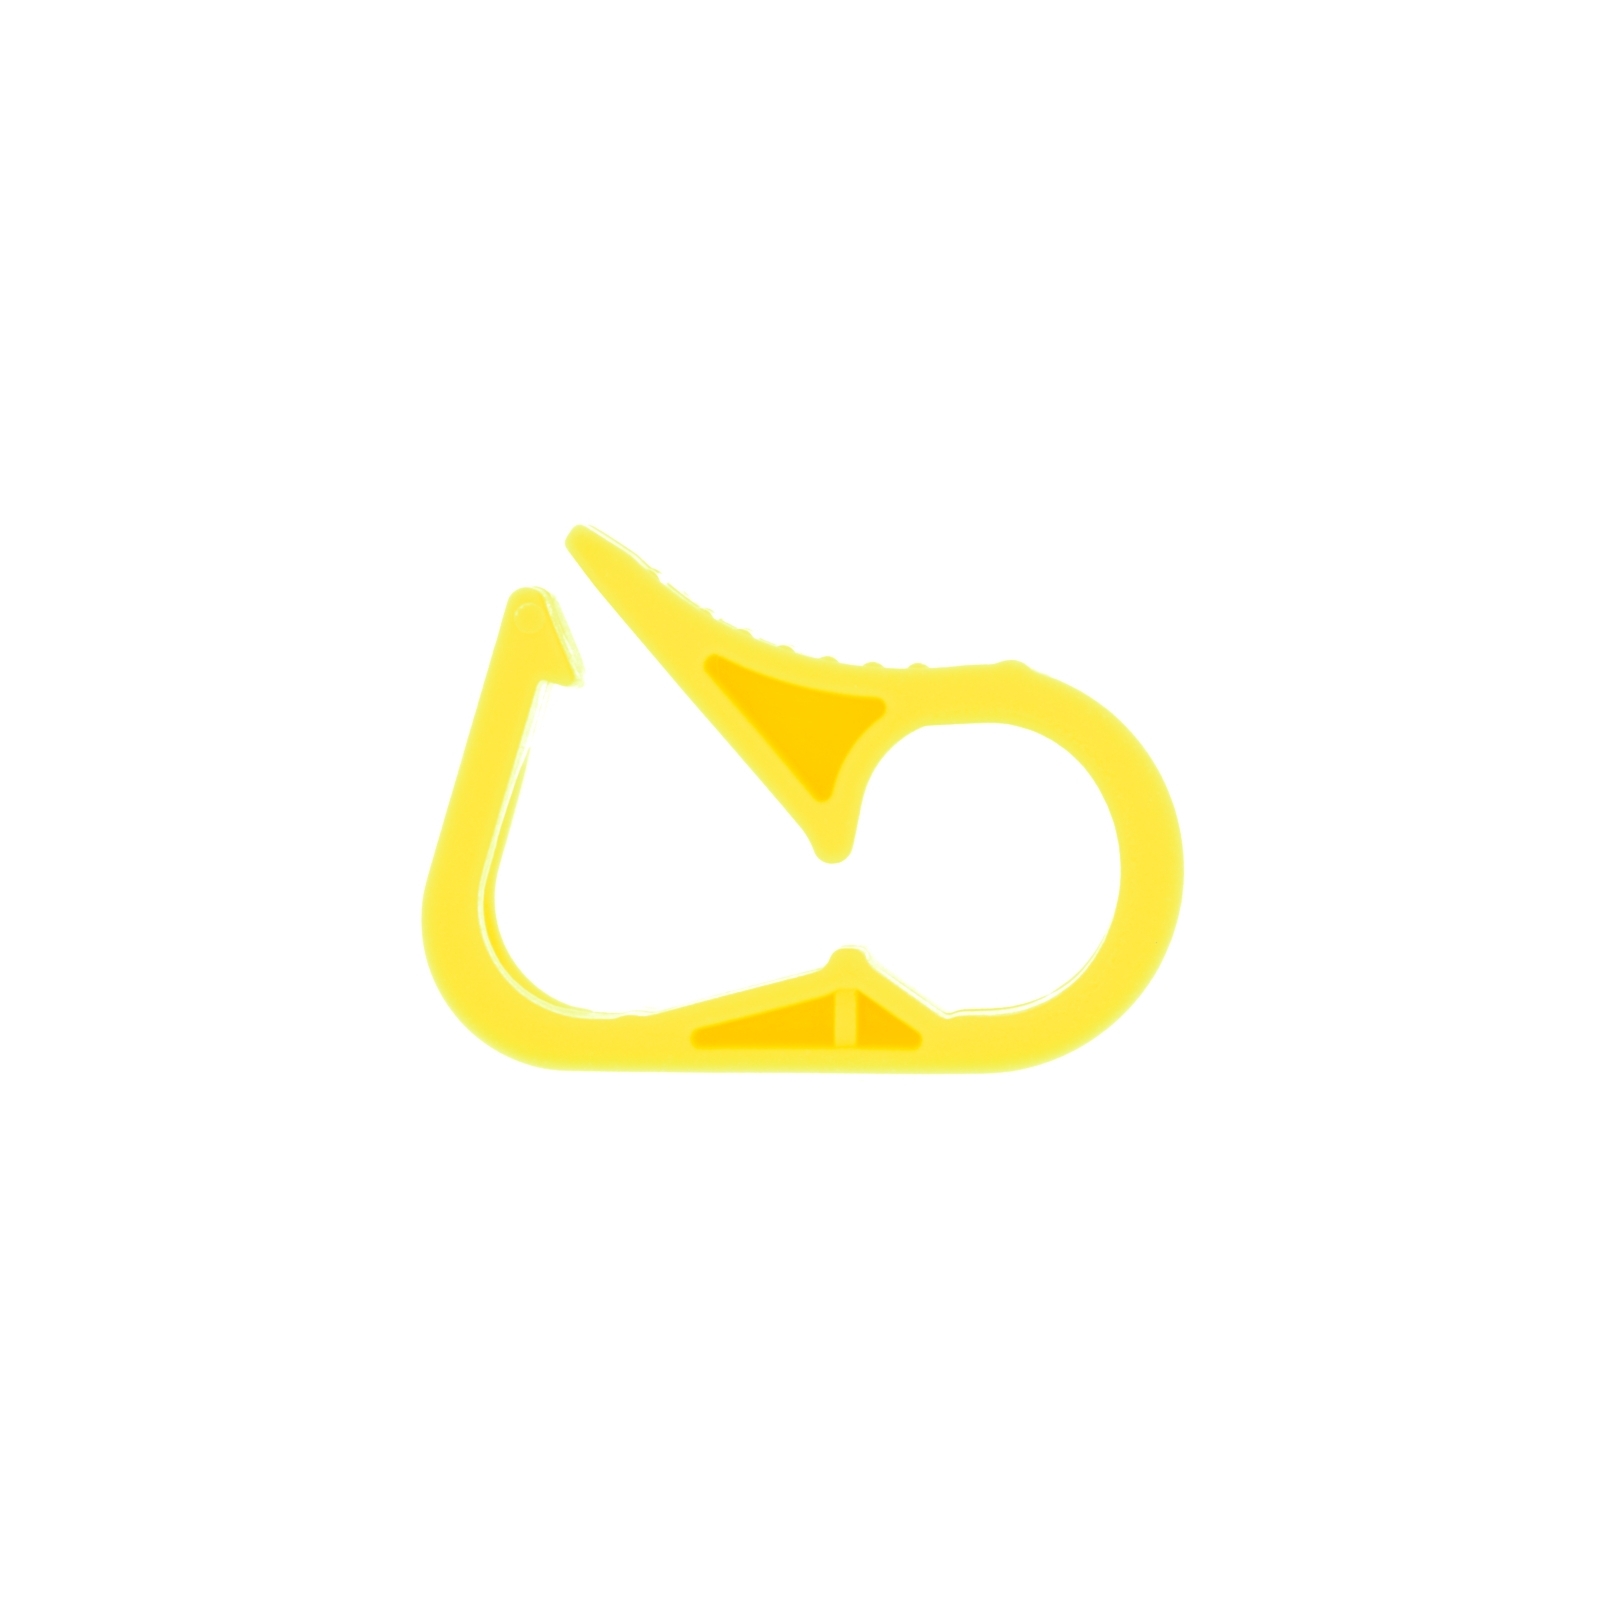 muroplas component yellow pinch clamp medical device